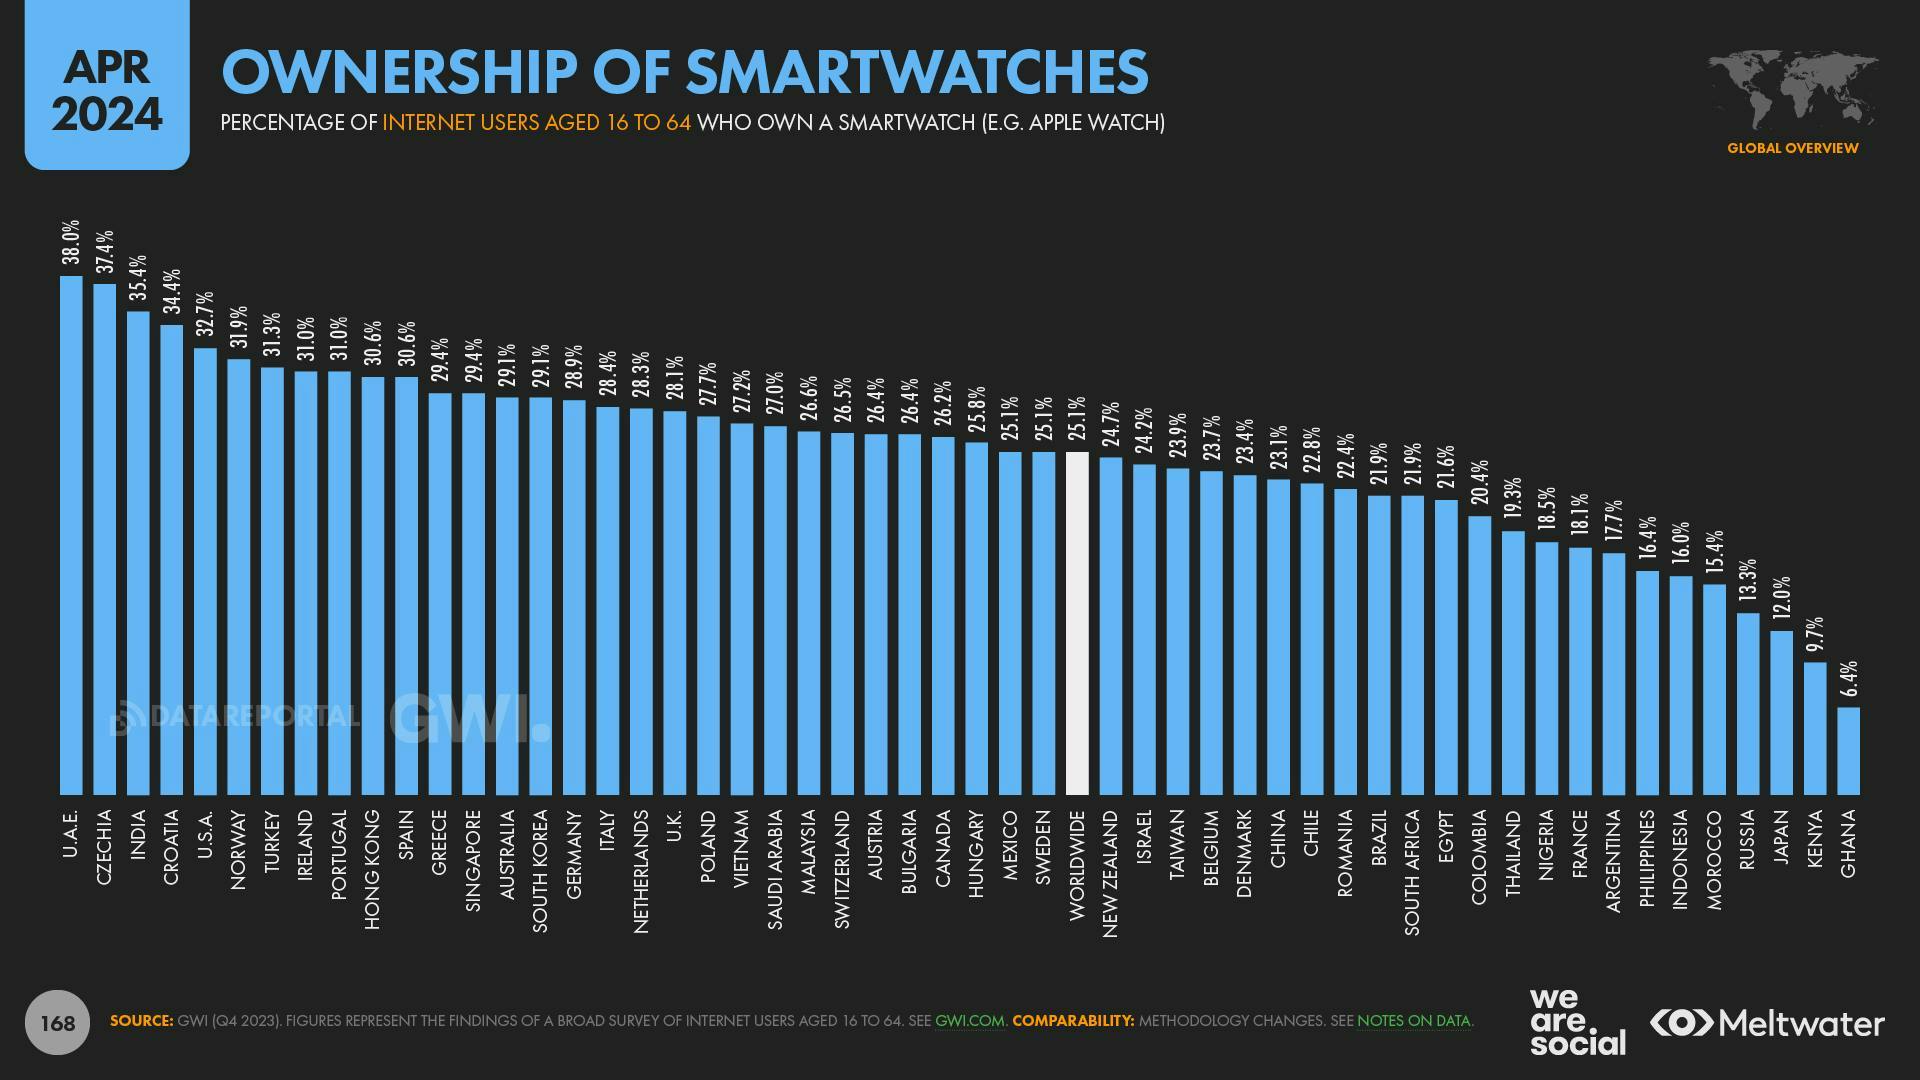 Ownership of smartwatches by country